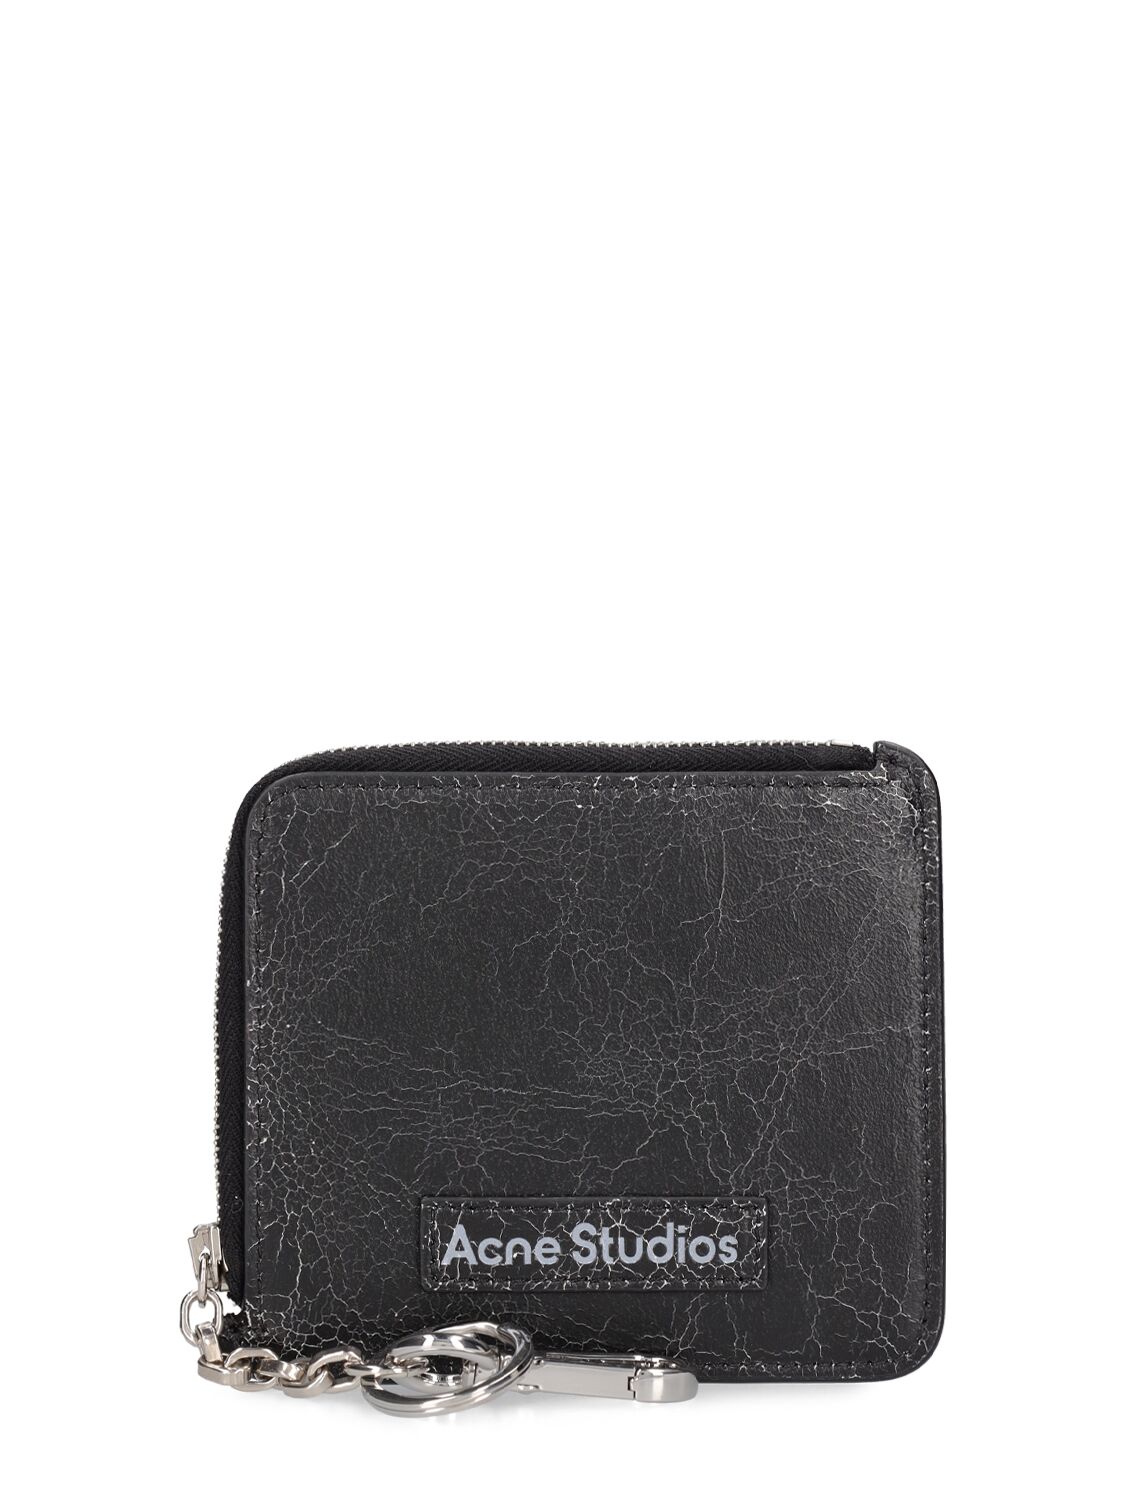 Image of Aquare Leather Zip Coin Purse